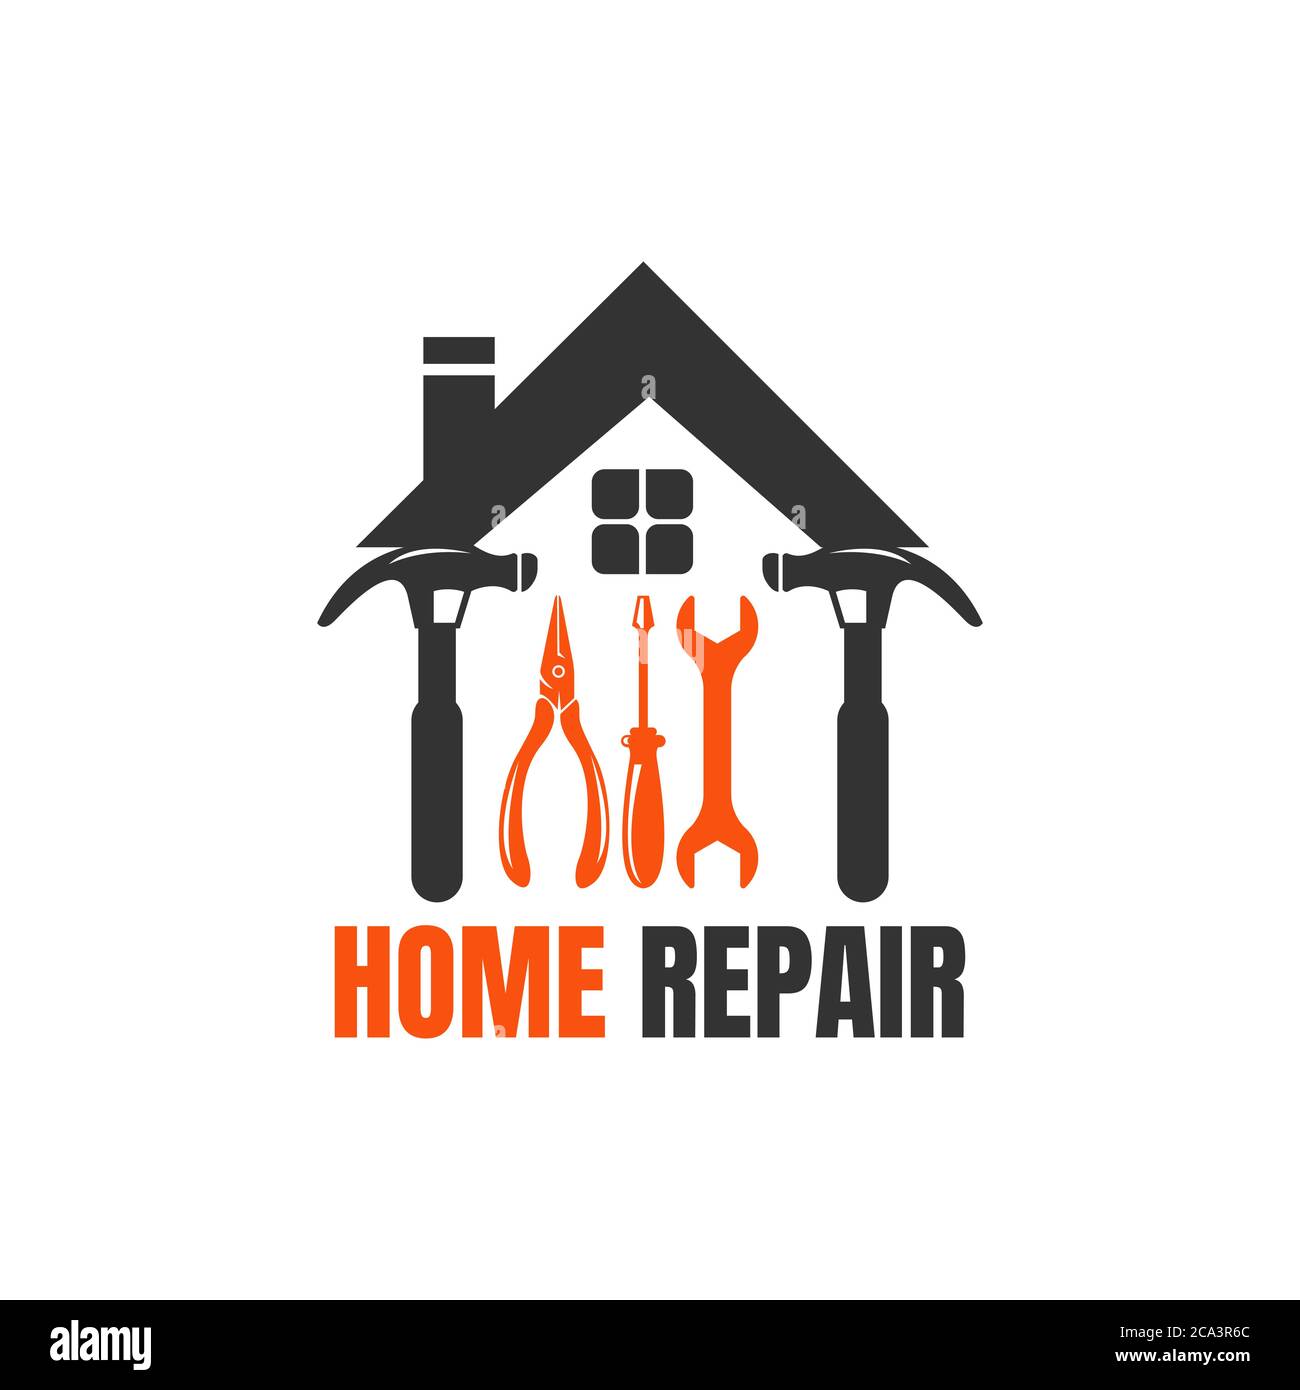 Home repair logo. House, Real Estate, Construction, Building Logo. House Vector. Tools icon. Repairs house sign. Home improvement icon. Stock Vector